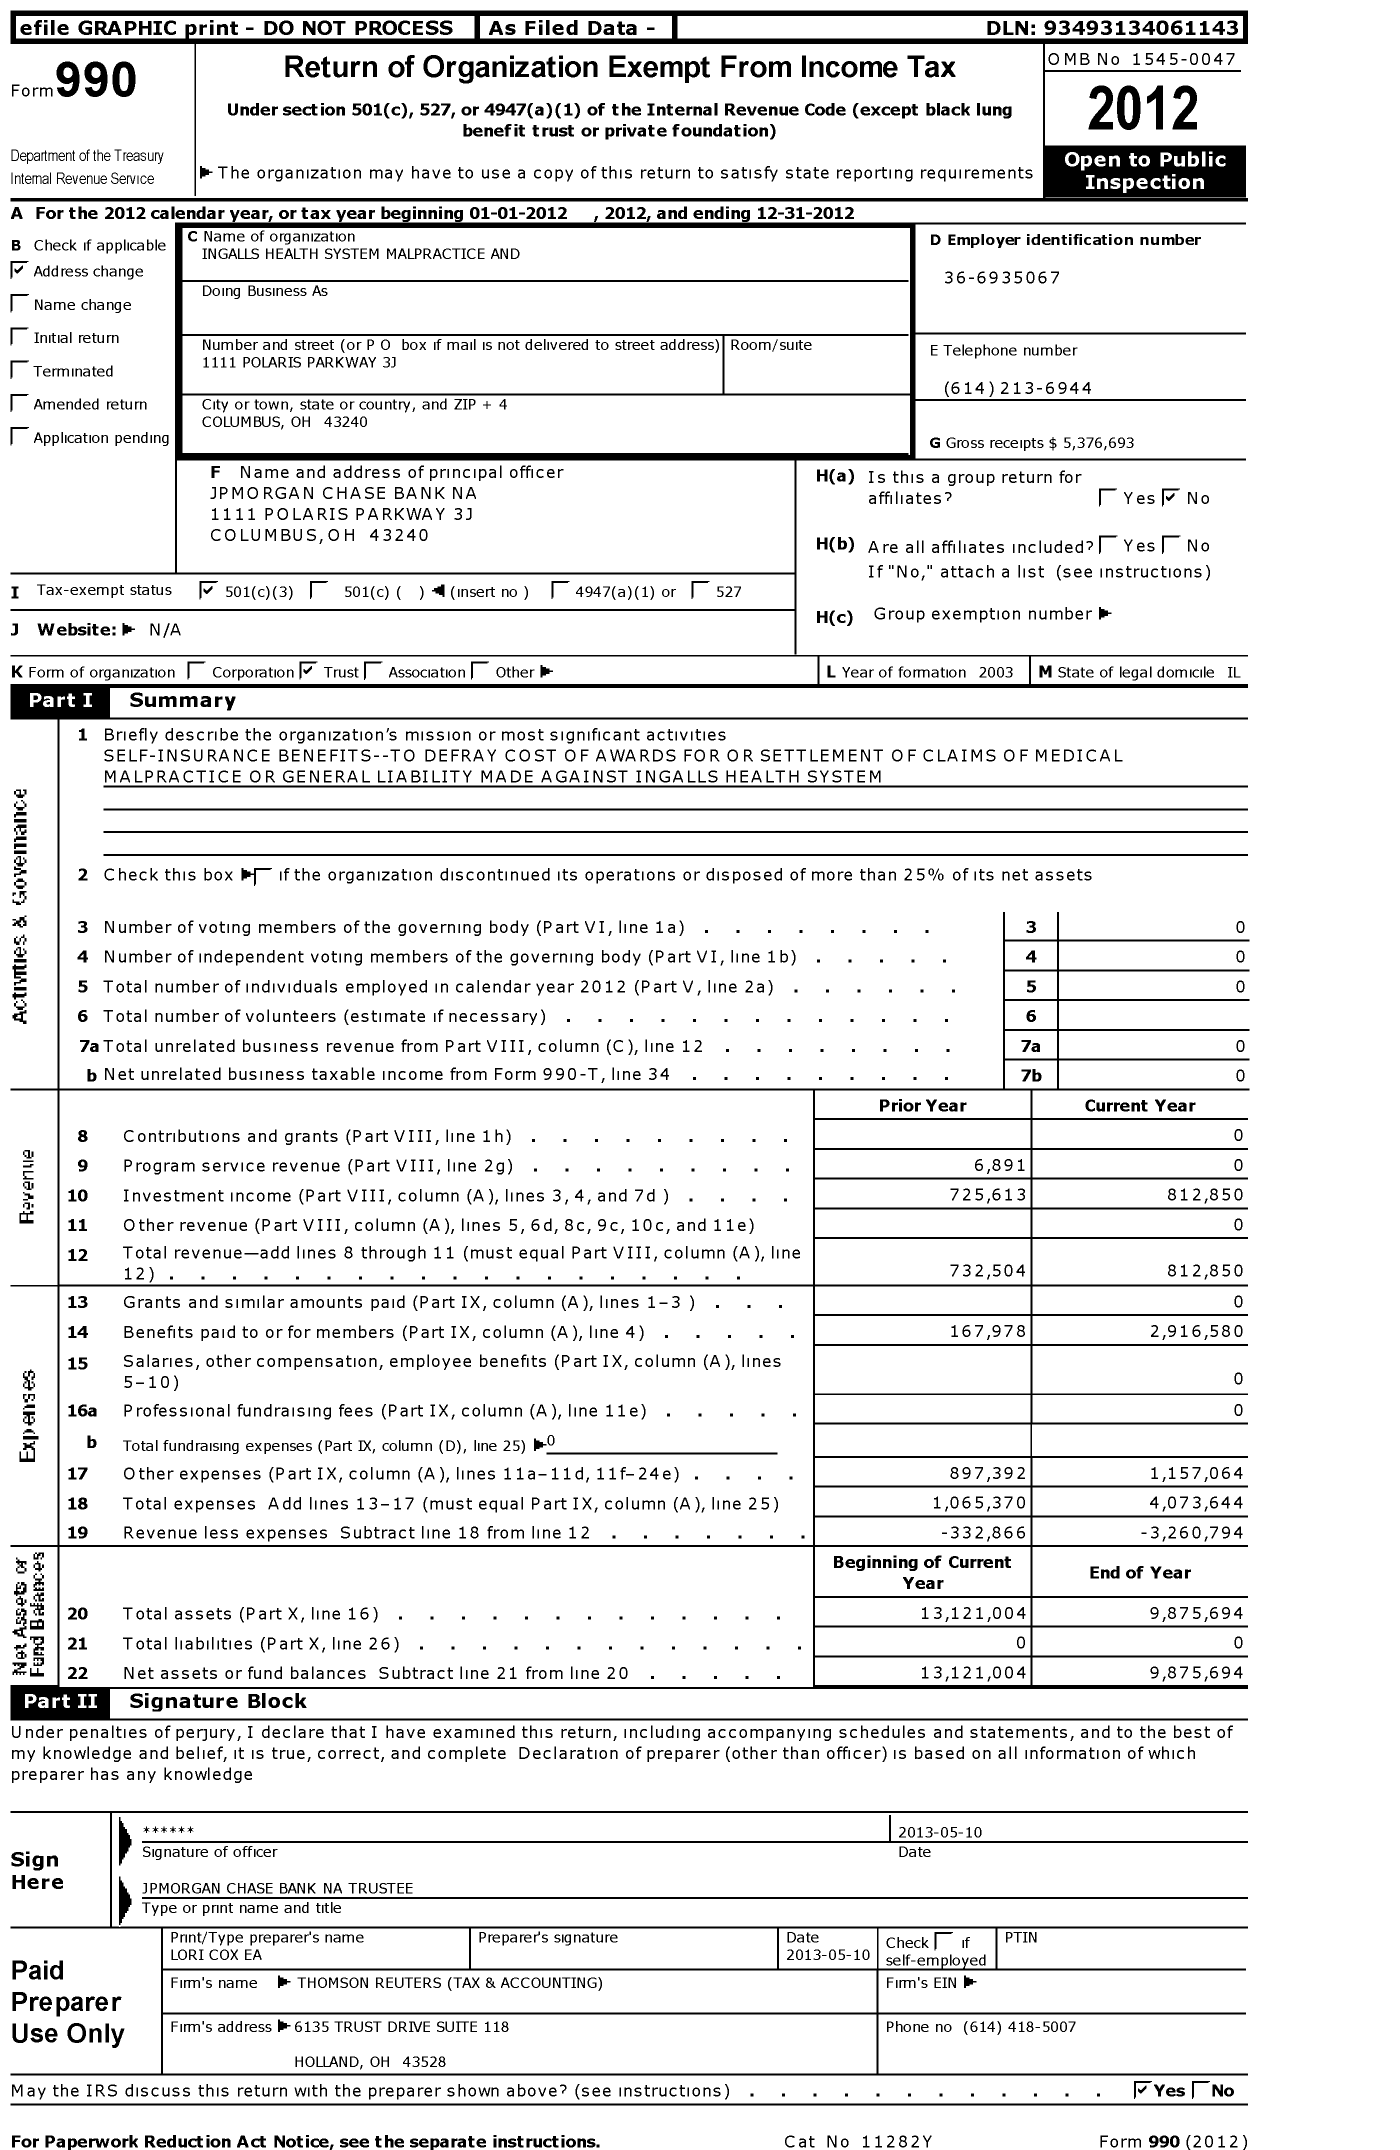 Image of first page of 2012 Form 990 for Ingalls Health System Malpractice and